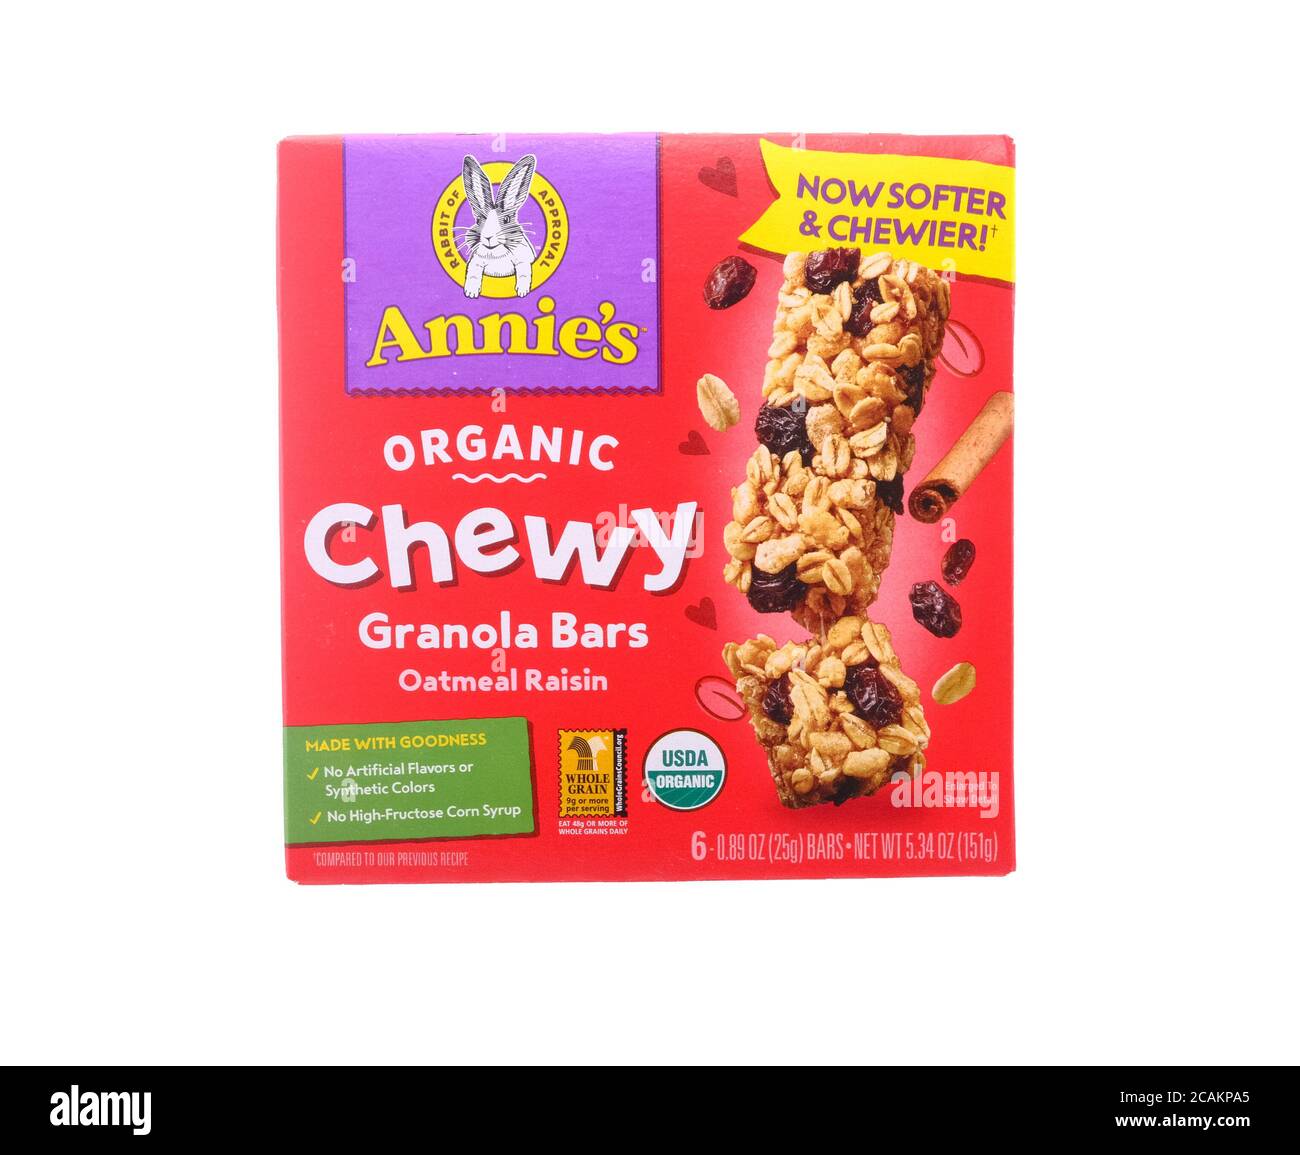 Annie's Organic chewy Granola bars Banque D'Images